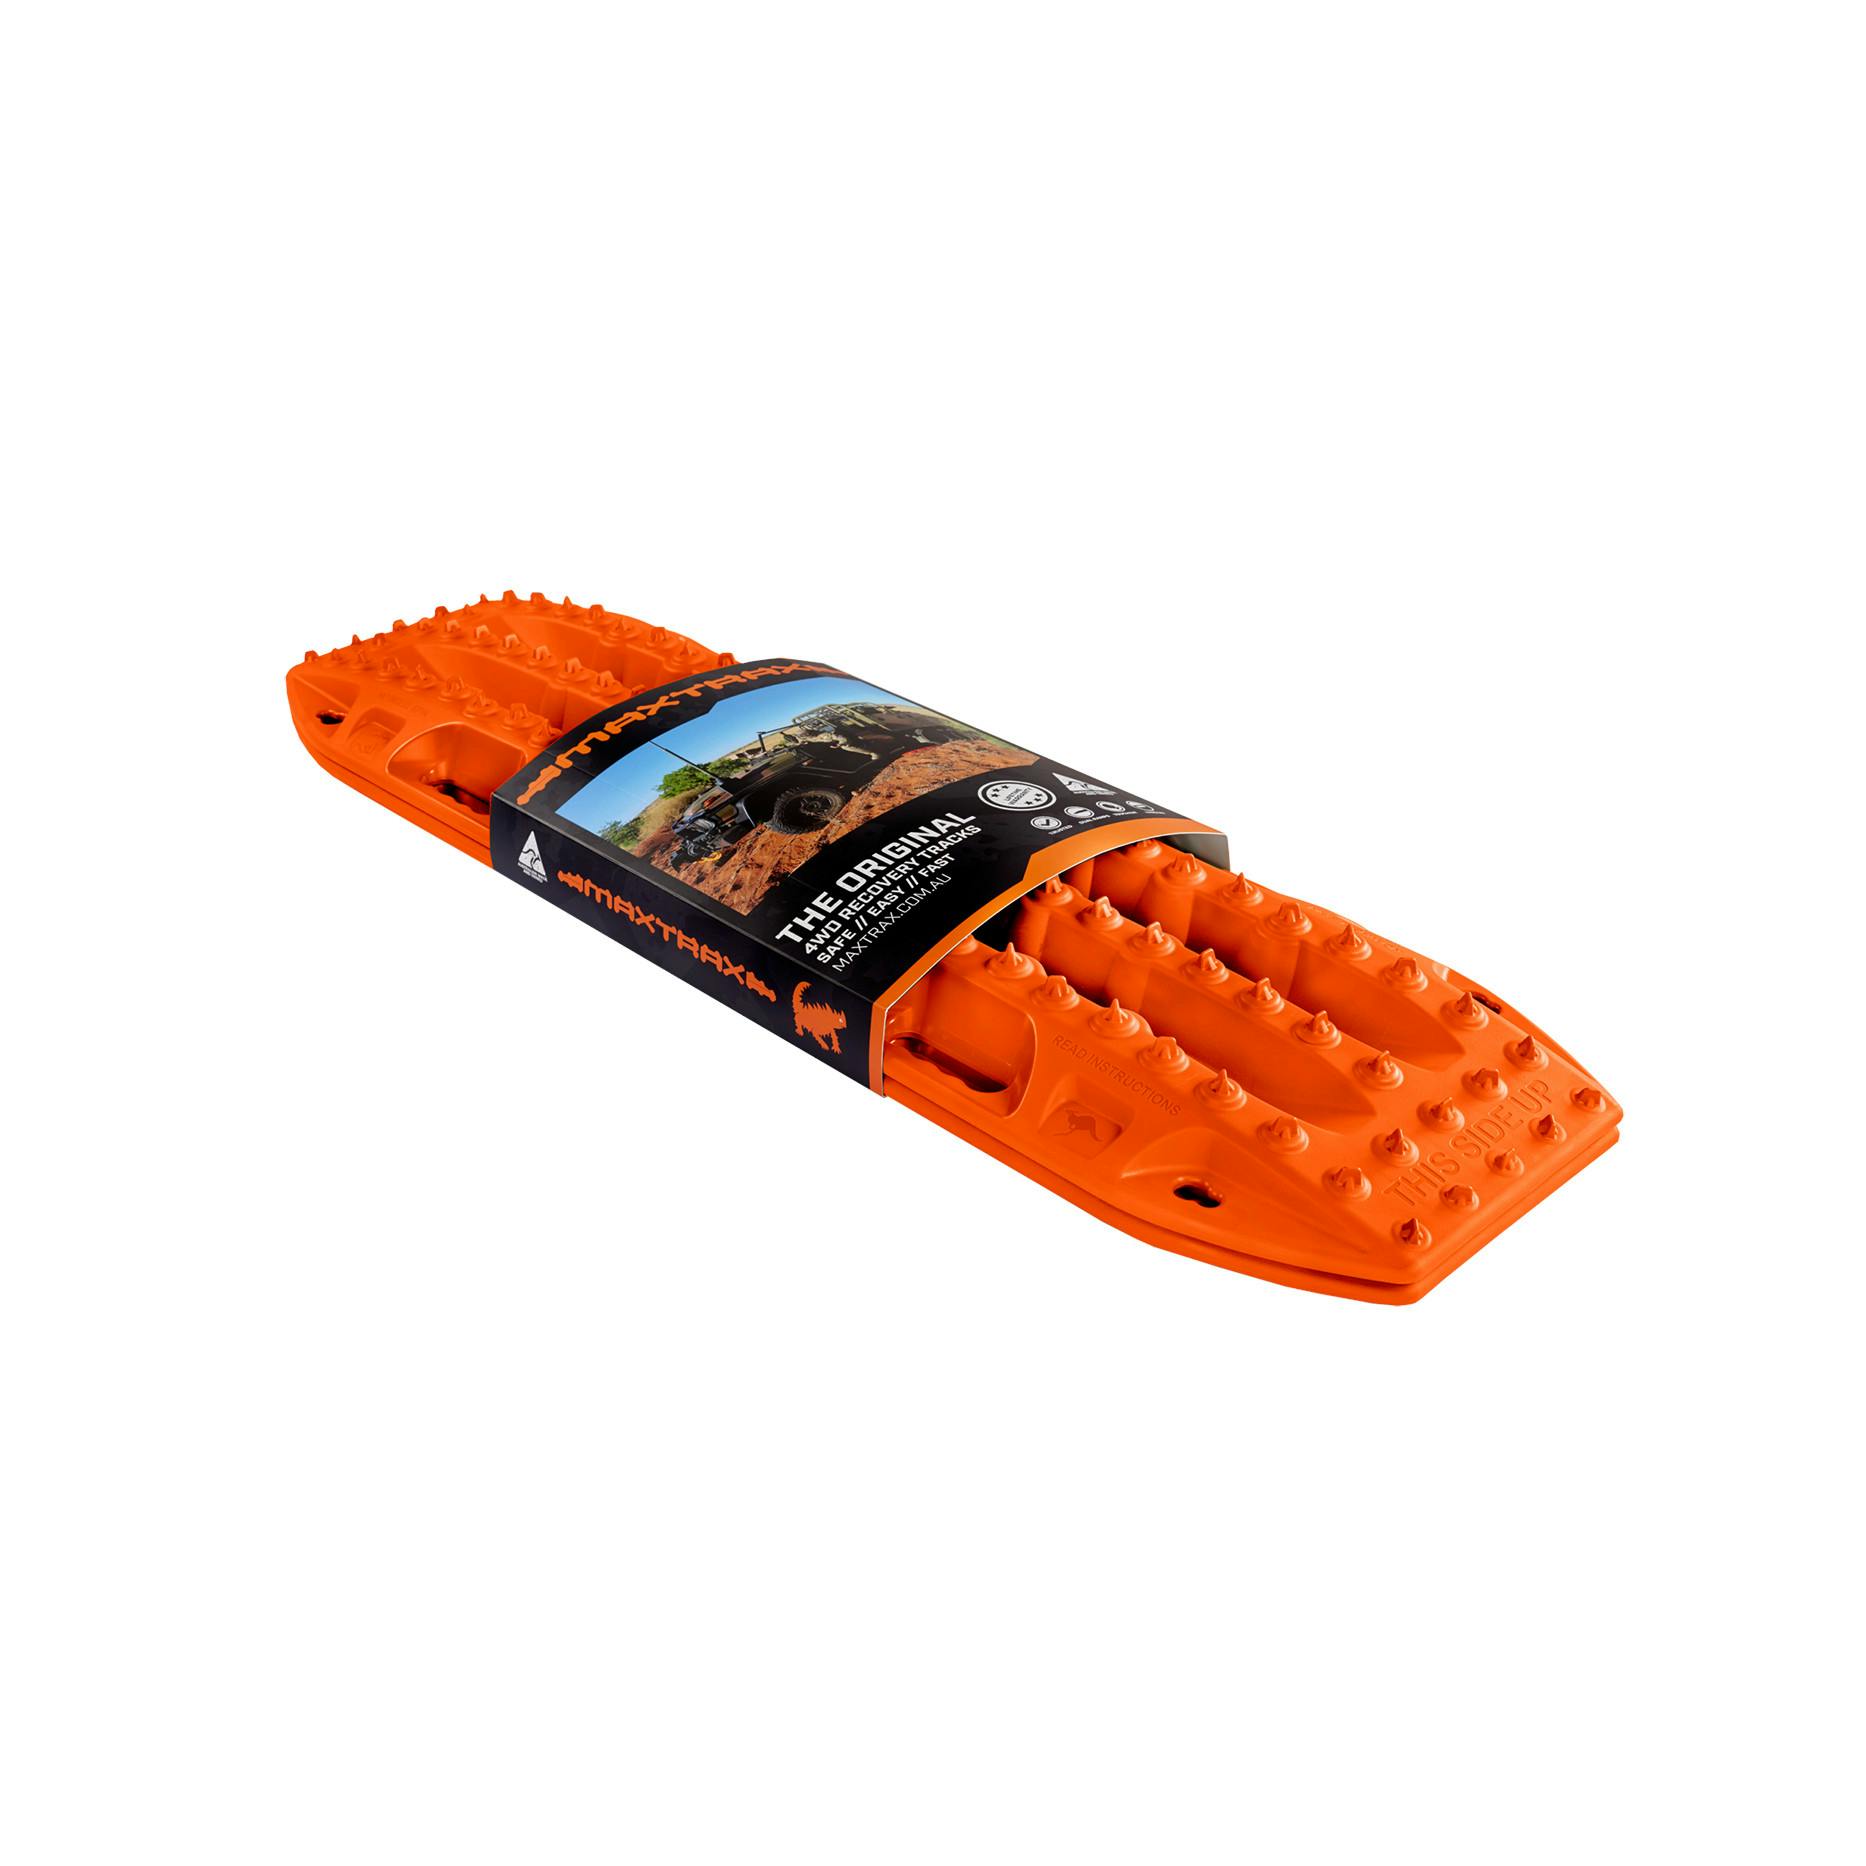 maxtrax signature orange recovery boards in a bundle on white background